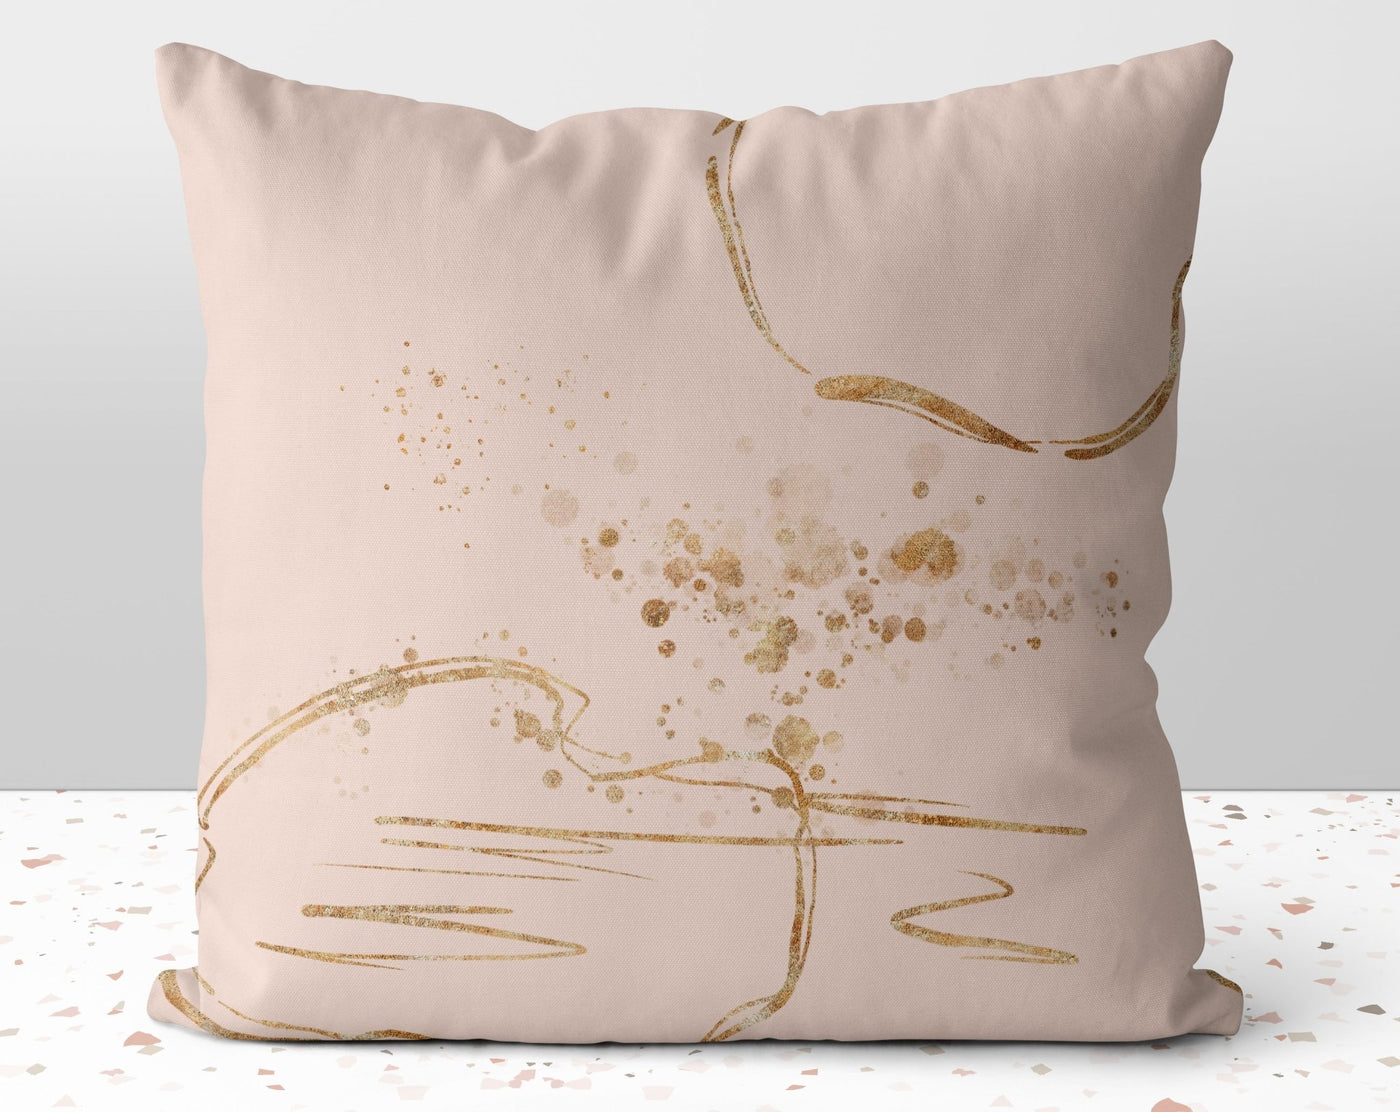 Chic Champagne with Gold Printed Accents Pillow Throw Cover with Insert - Cush Potato Pillows